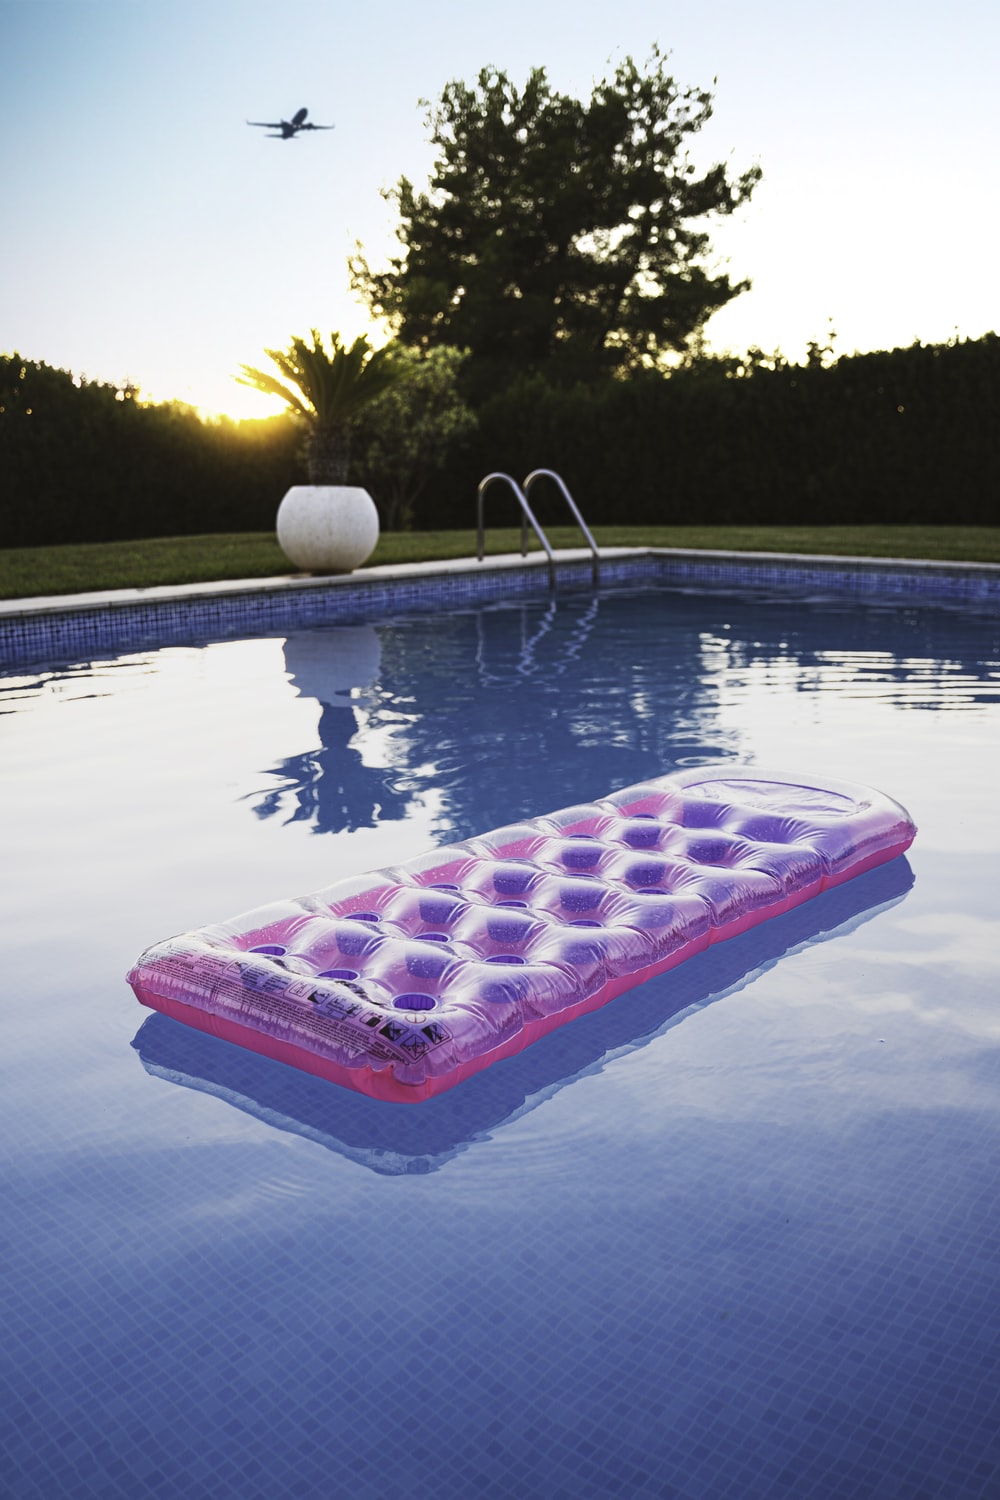 The Pool Roof (Pooltak) is perfect for pools designed for cold weather